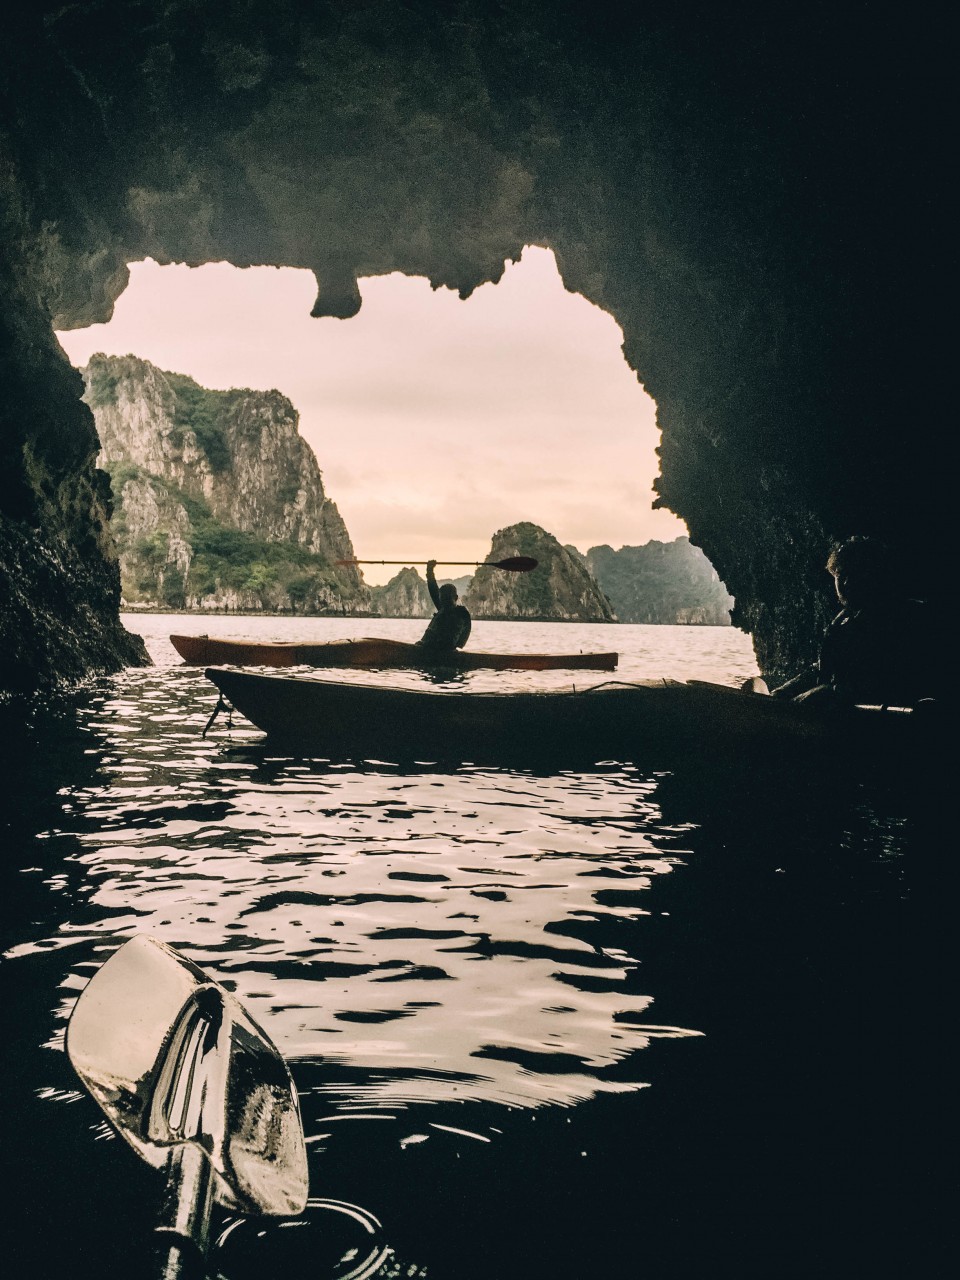 Kayaking with friends in Halong Bay, Vietnam